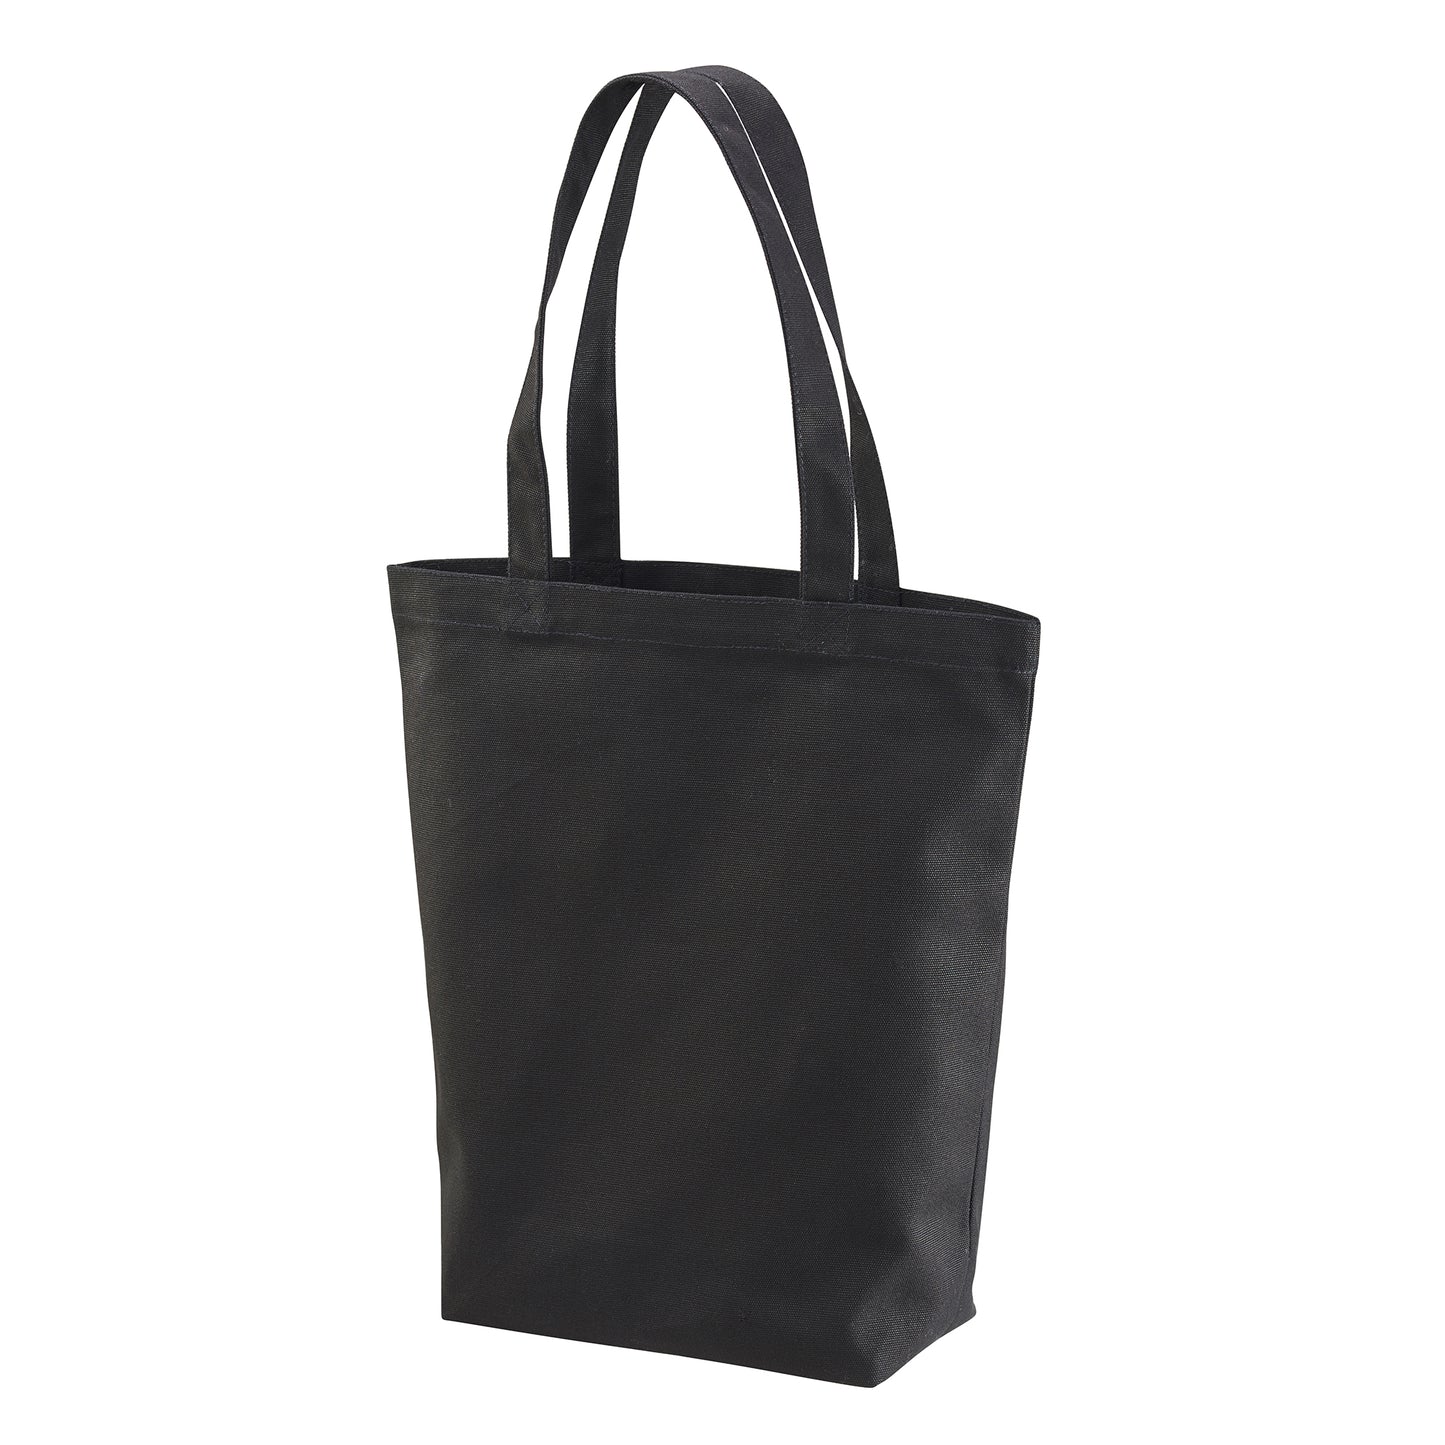 United Athle [1460-01] Canvas tote bag